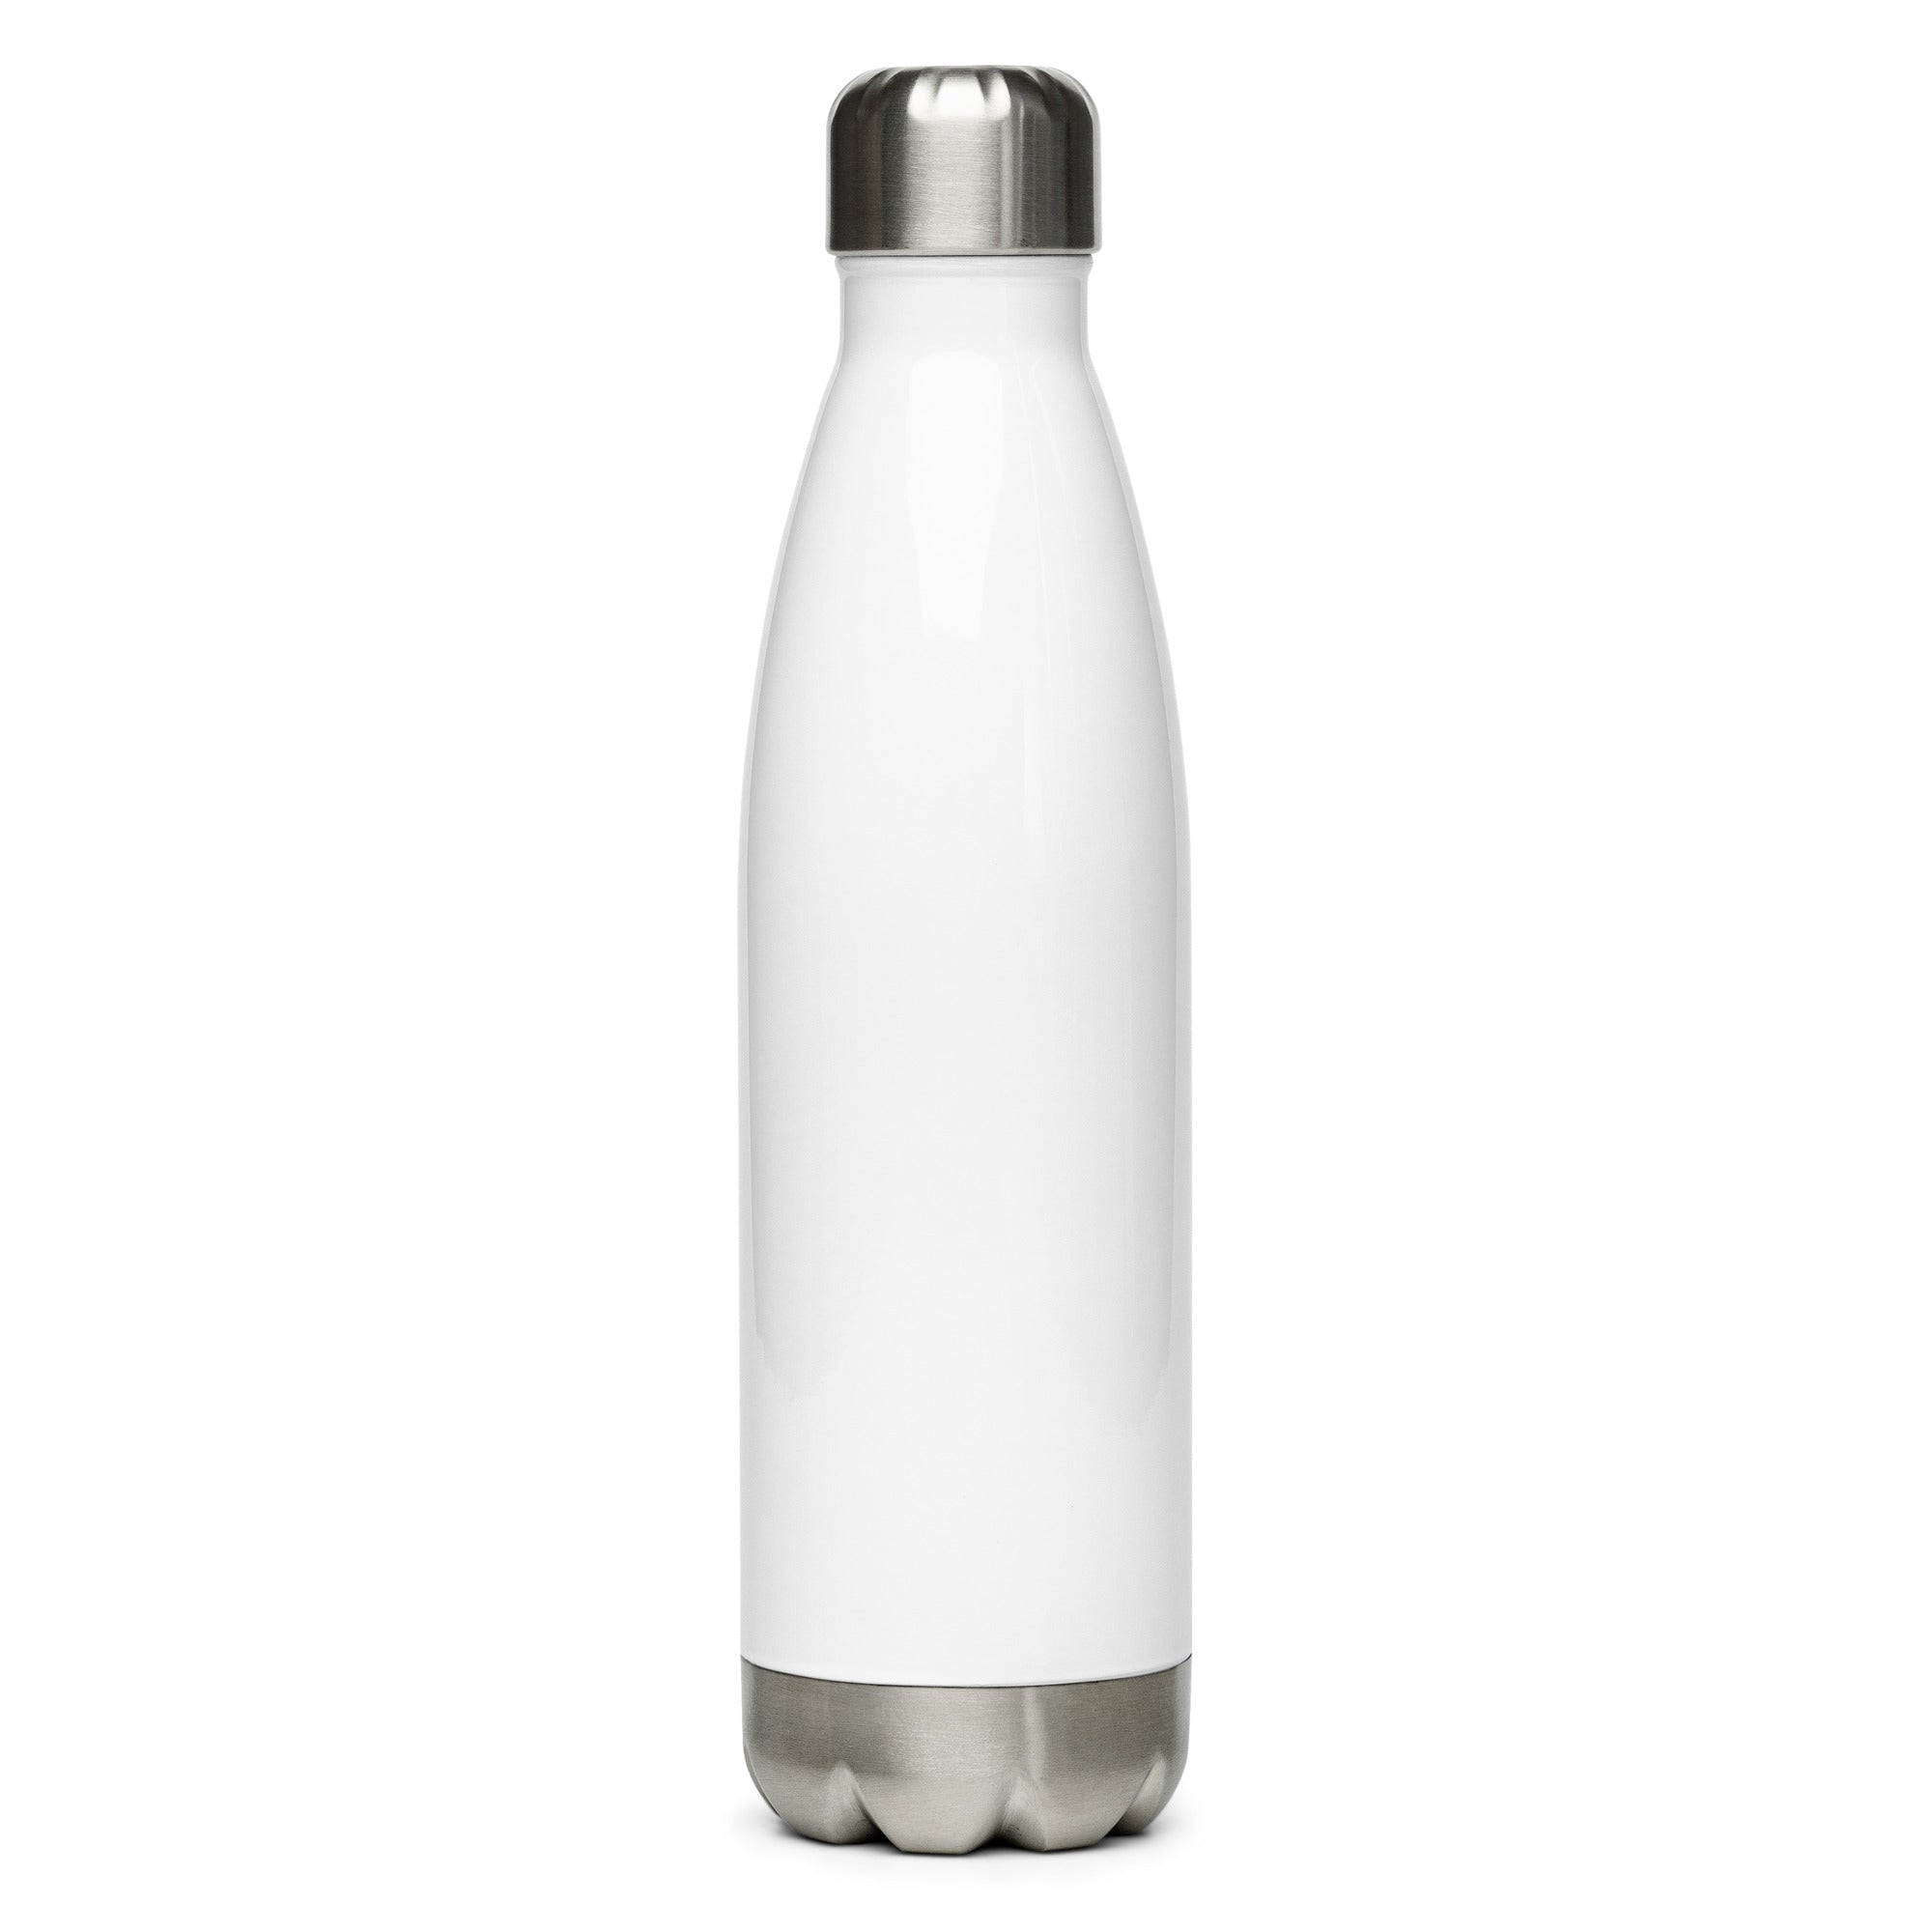 I COME IN PEACE - Stainless Steel Water Bottle - ChubbleGumLLC